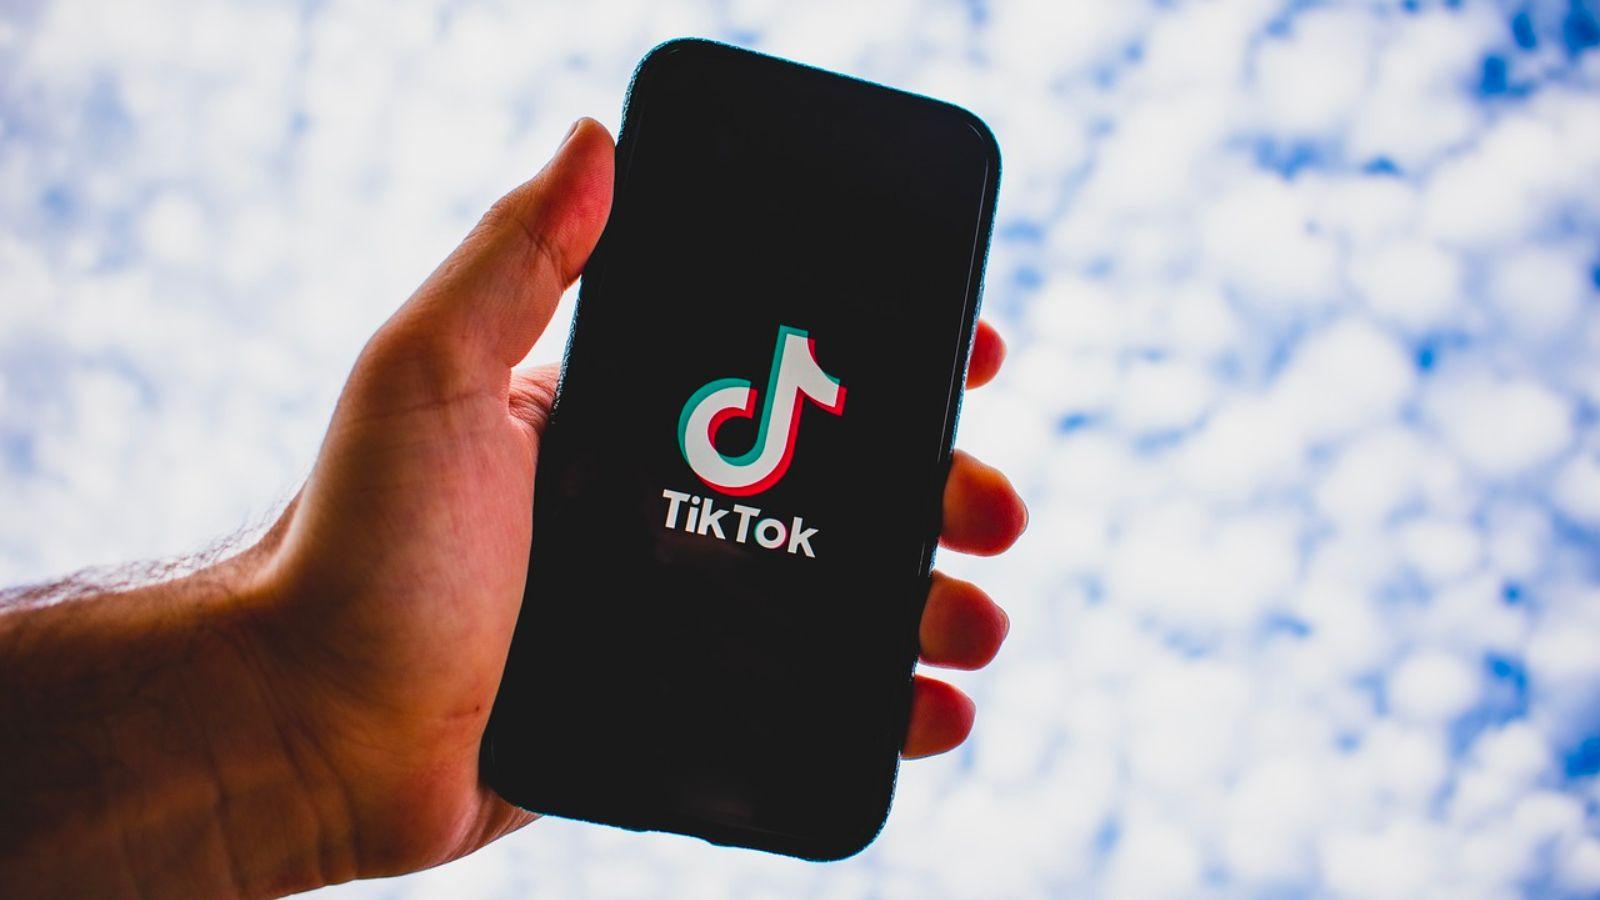 Hand holding smartphone with TikTok logo showing on screen